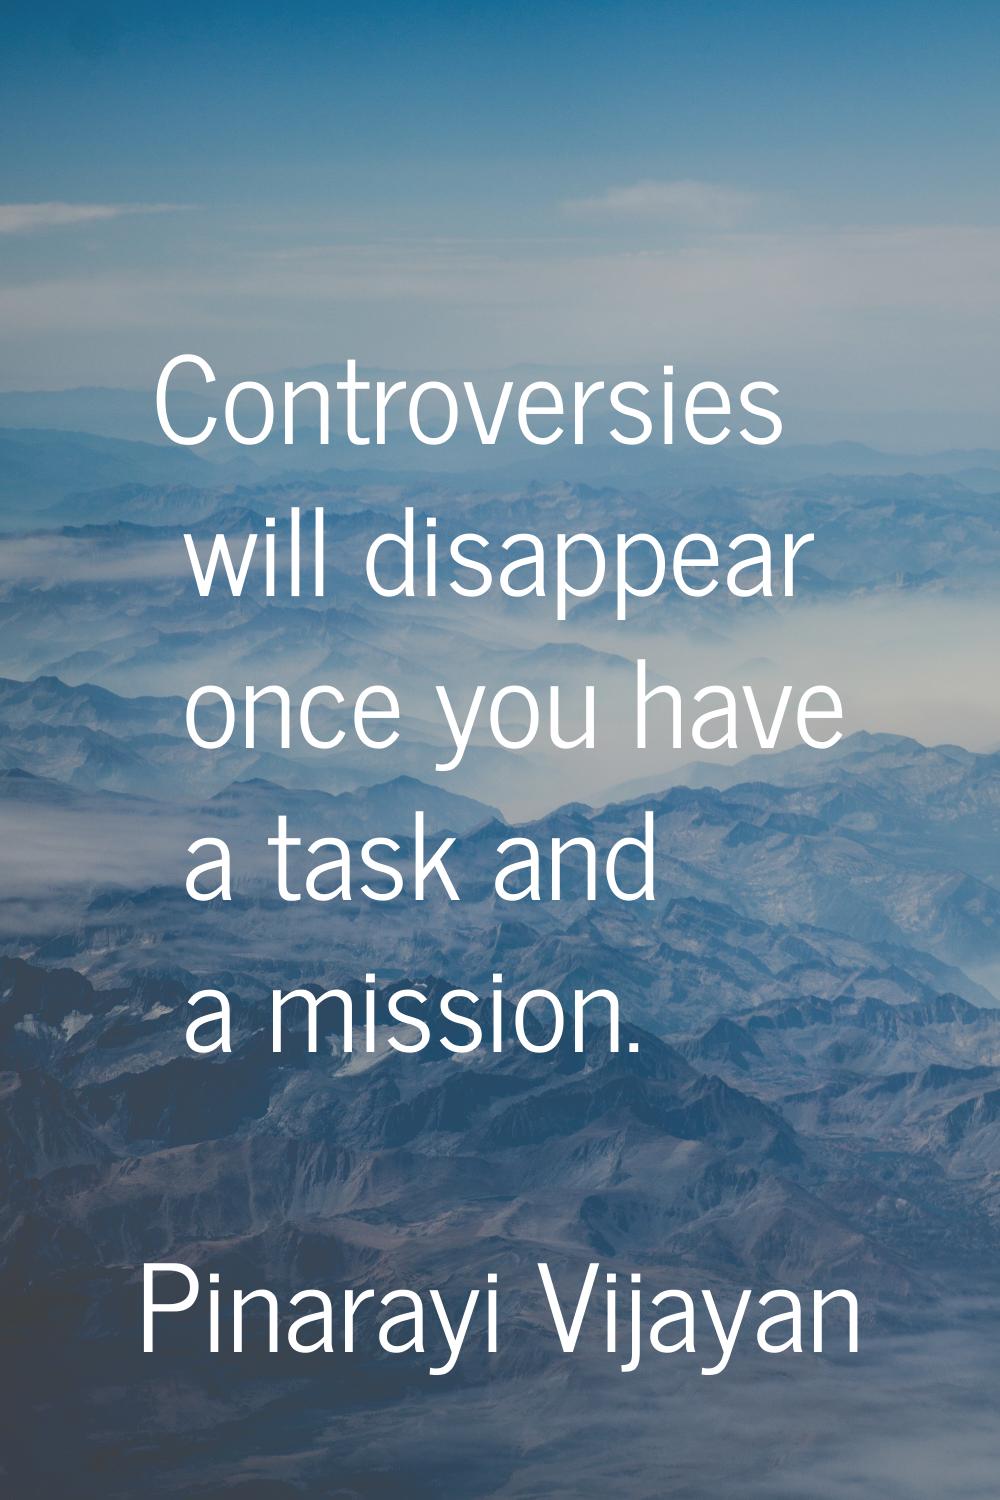 Controversies will disappear once you have a task and a mission.